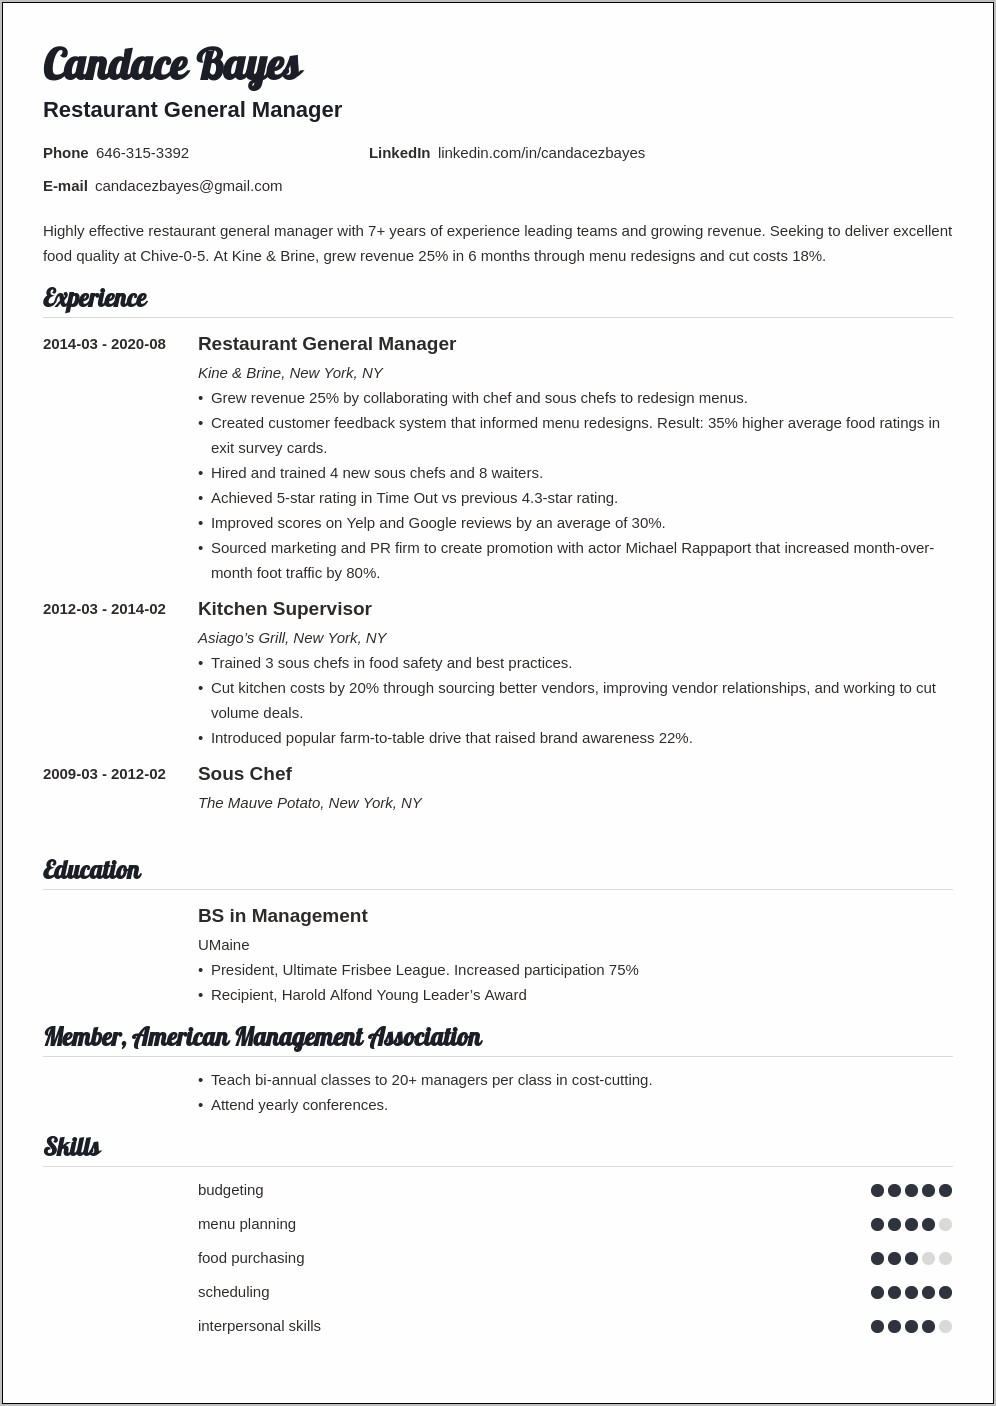 Resume For Food Service General Manager